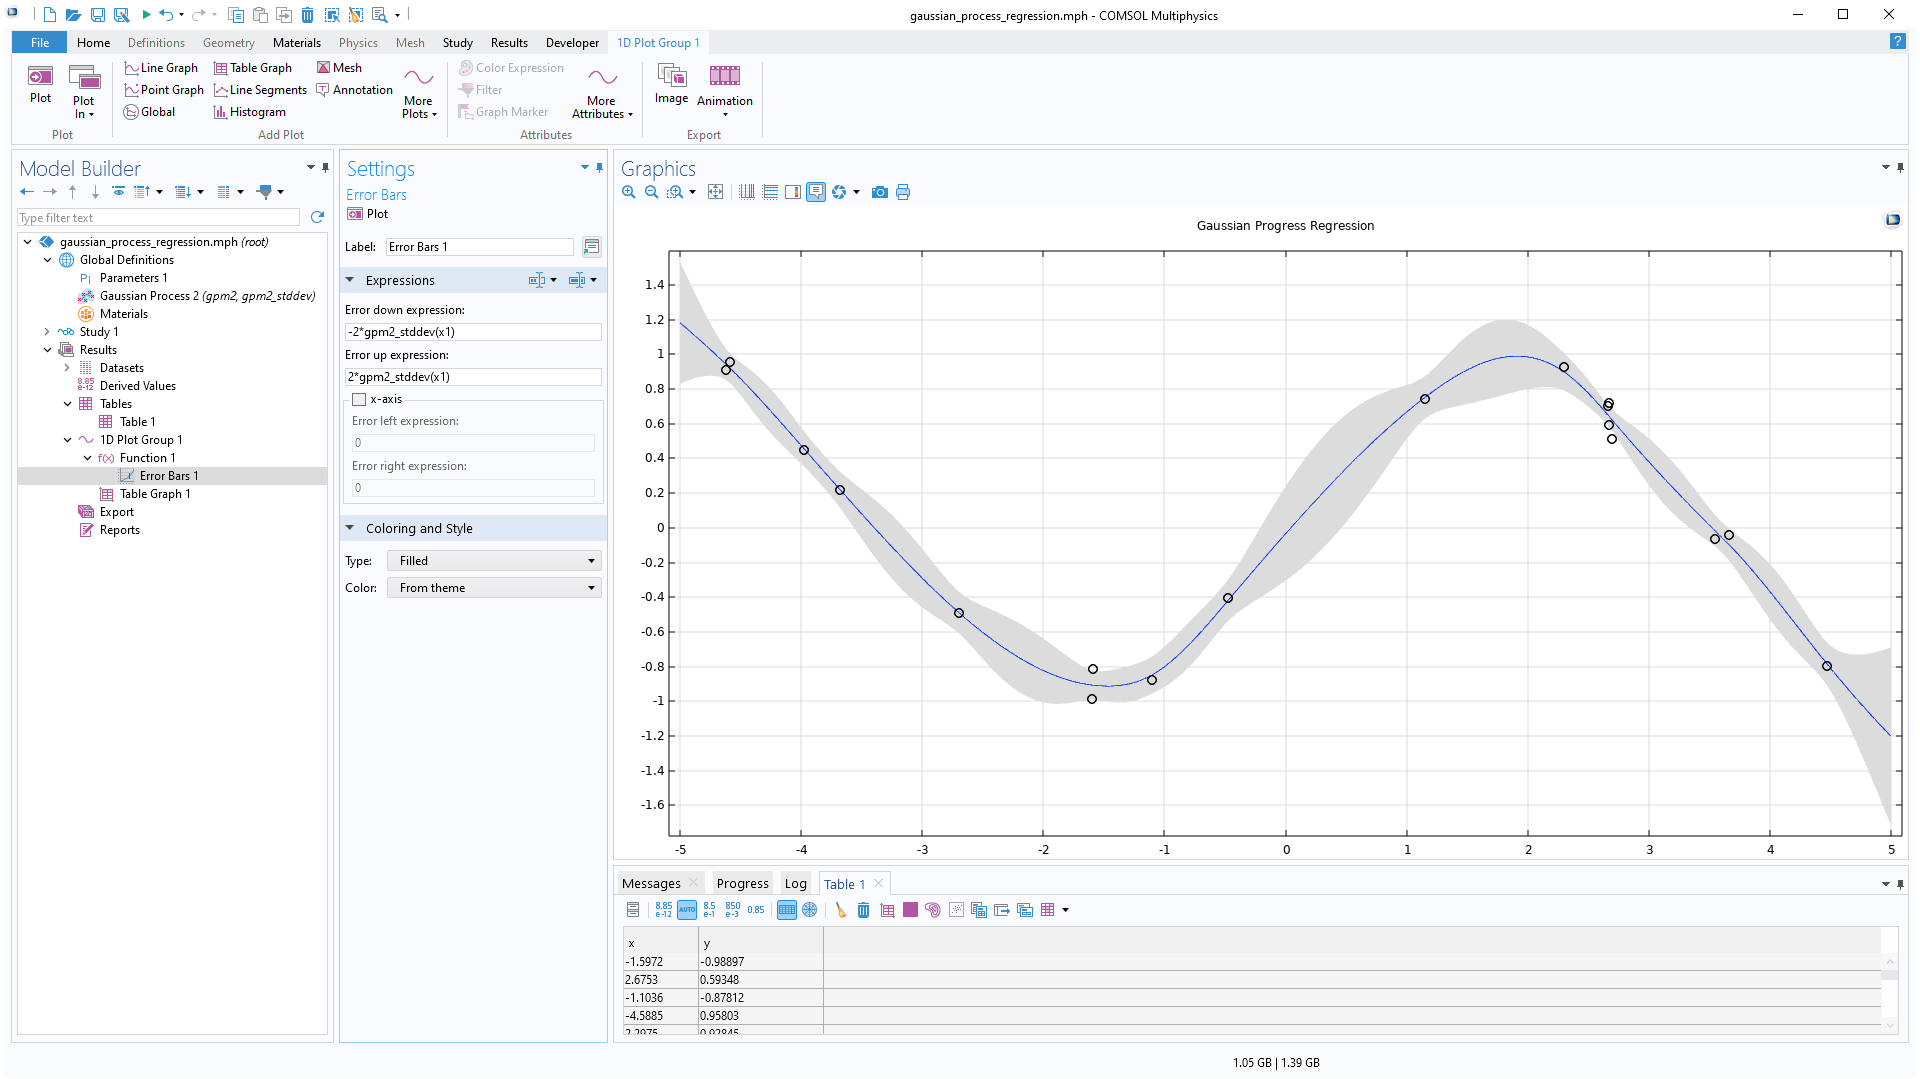 The COMSOL Multiphysics UI showing the Model Builder with the Error Bars node highlighted, the corresponding Settings window, and a 1D plot in the Graphics window.